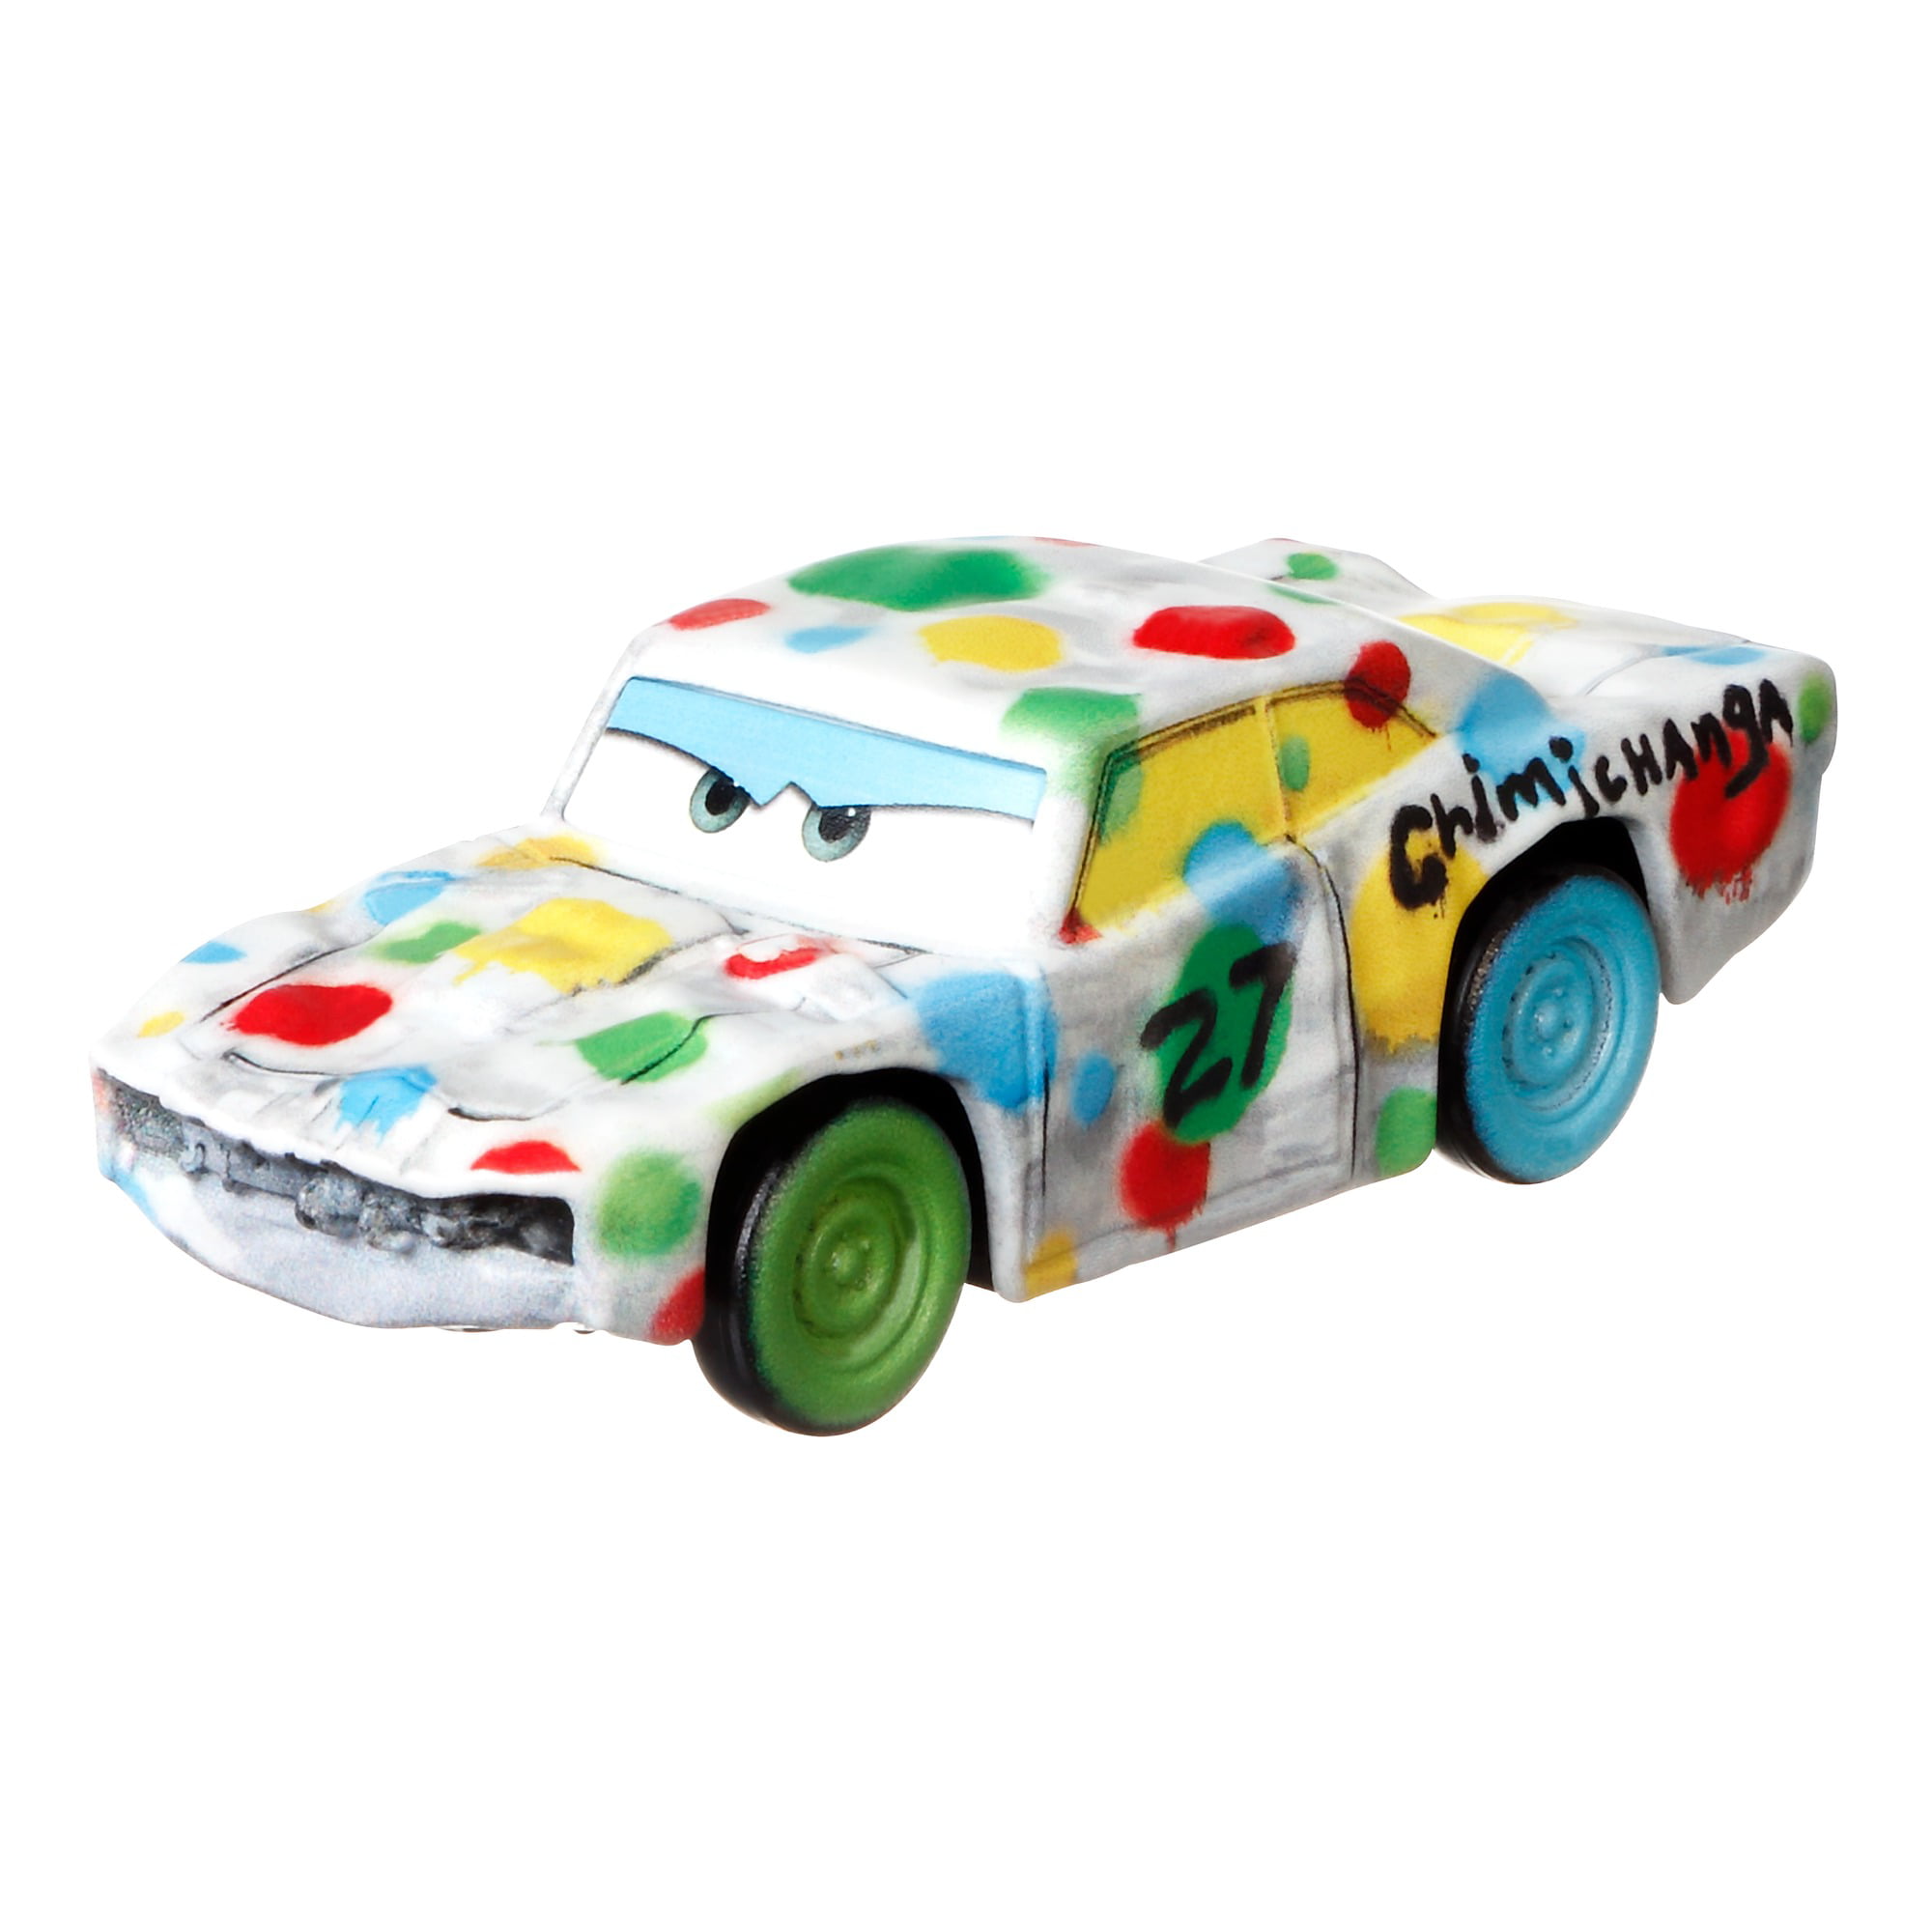 1:55 Diecast Details about   DISNEY/PIXAR CARS ASSORTED FIGURES Collect Them All 